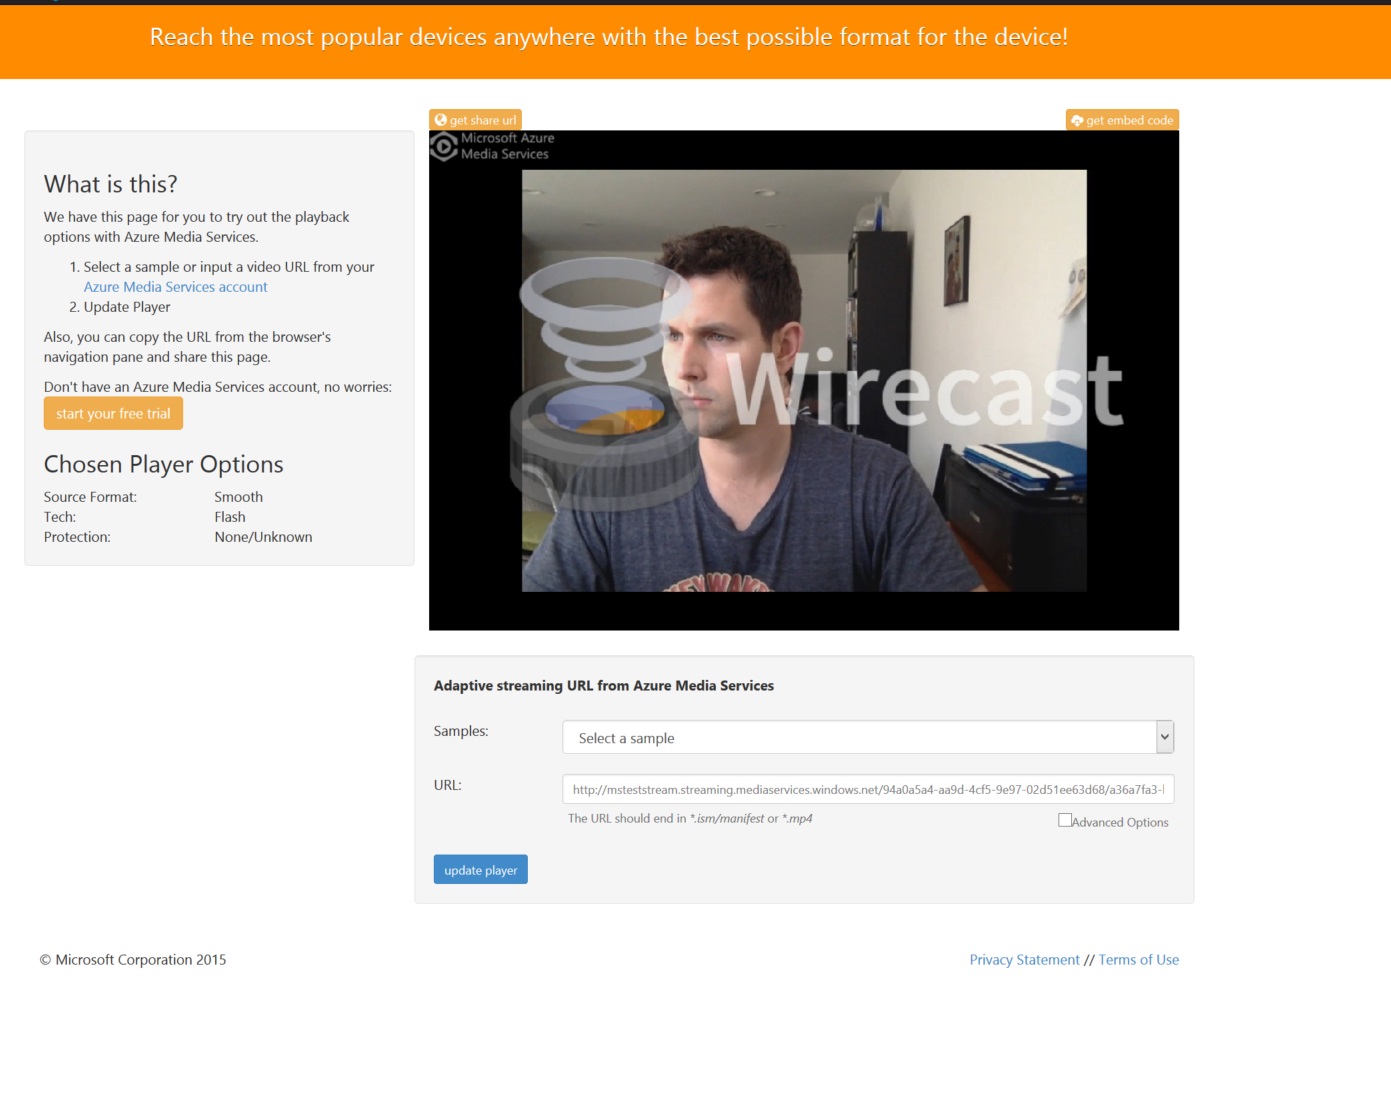 Live streaming HTML5 video using Azure Media Services Dave Voyles Software Engineer, Microsoft